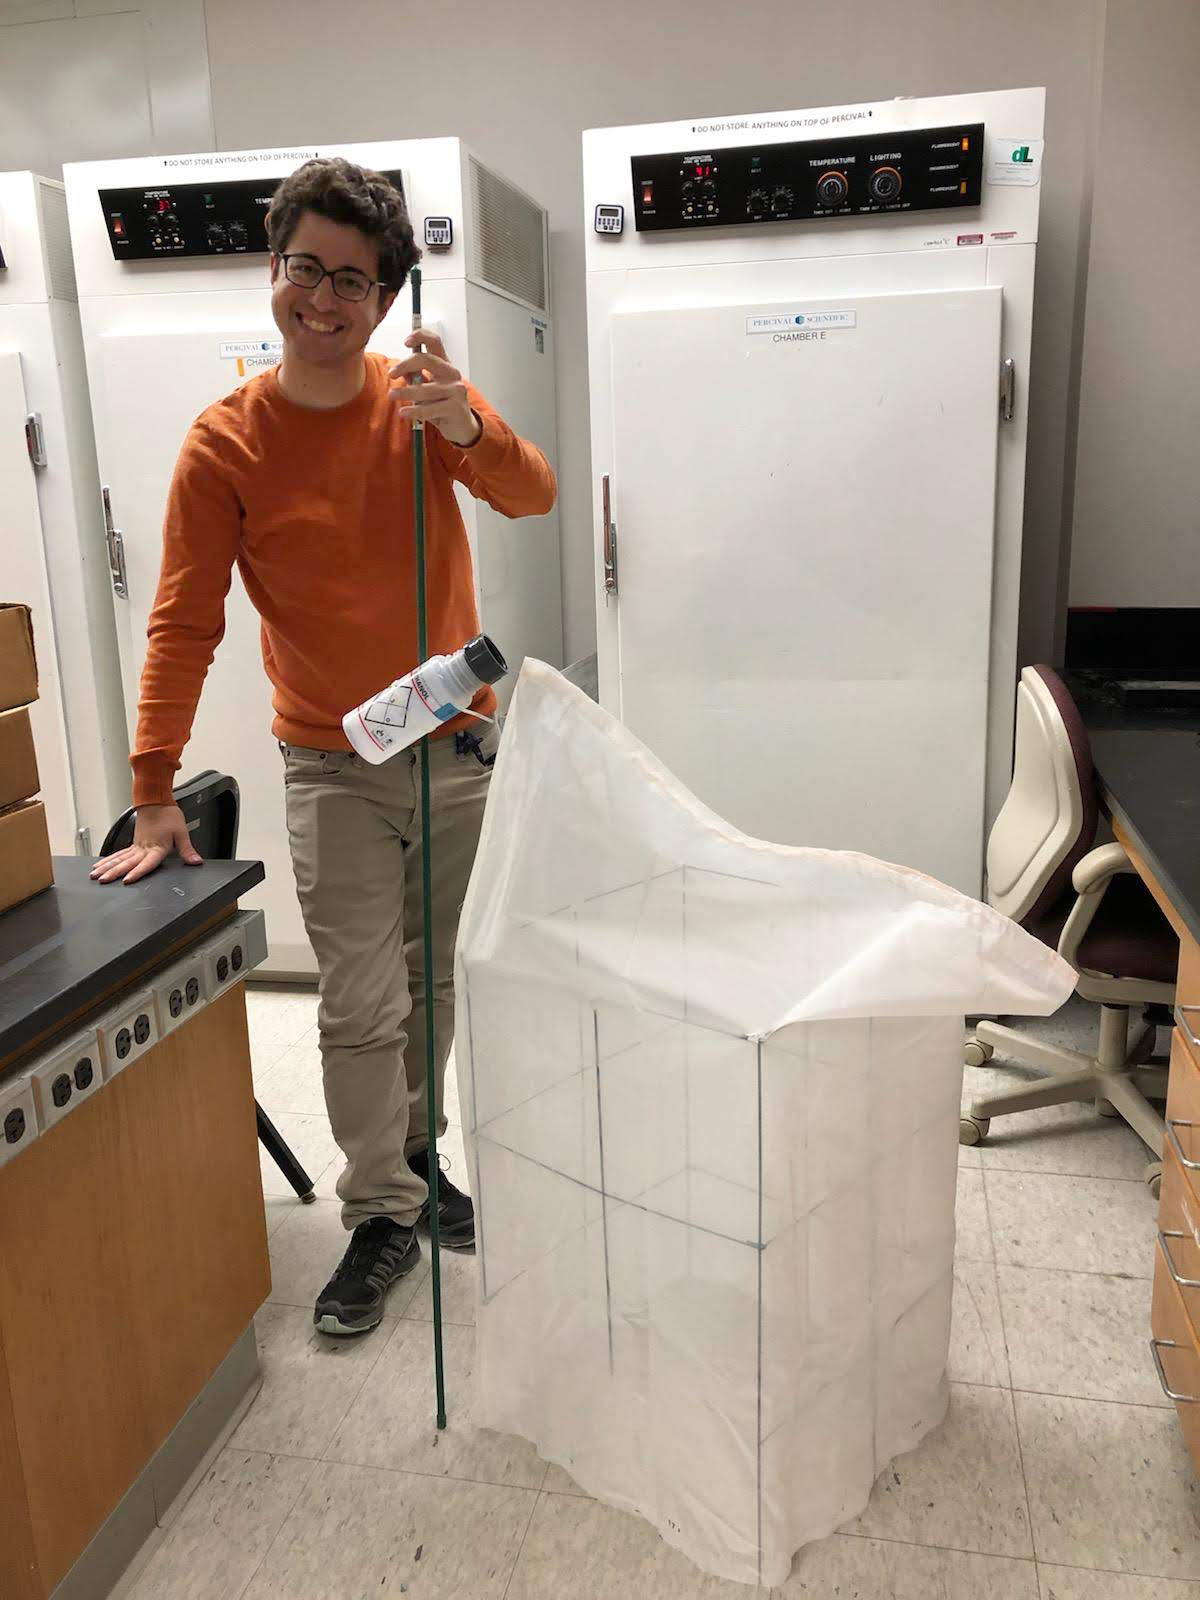 A smiling young man stands in a lab, next to a white mesh box. He is holding a pole with a plastic container attached to it.